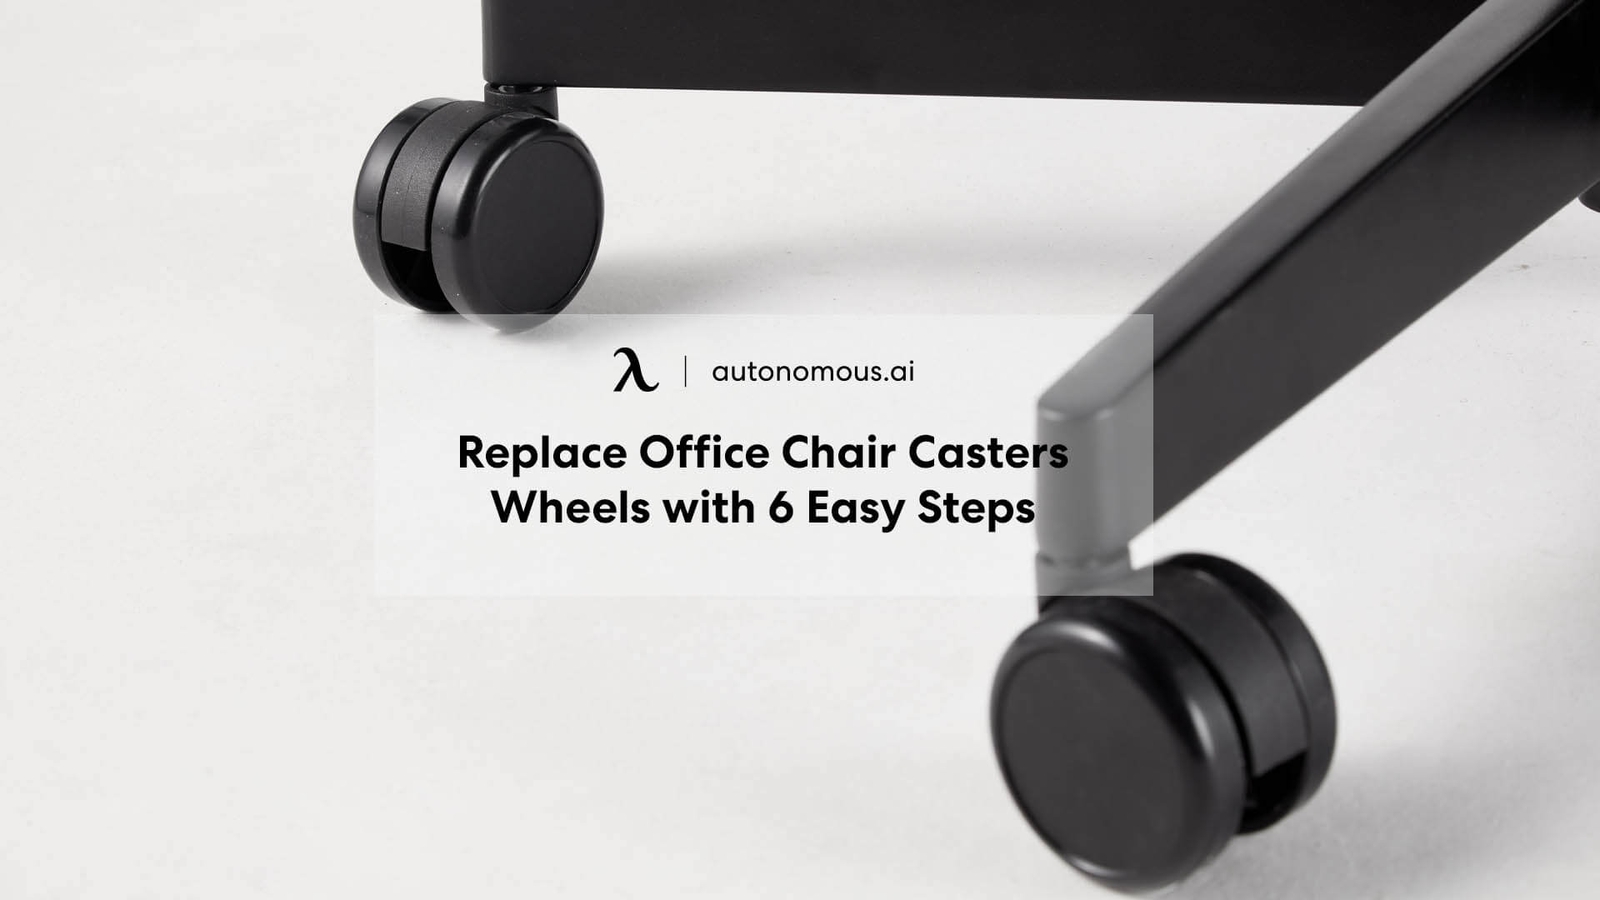 Replace Office Chair Casters Wheels with 6 Easy Steps